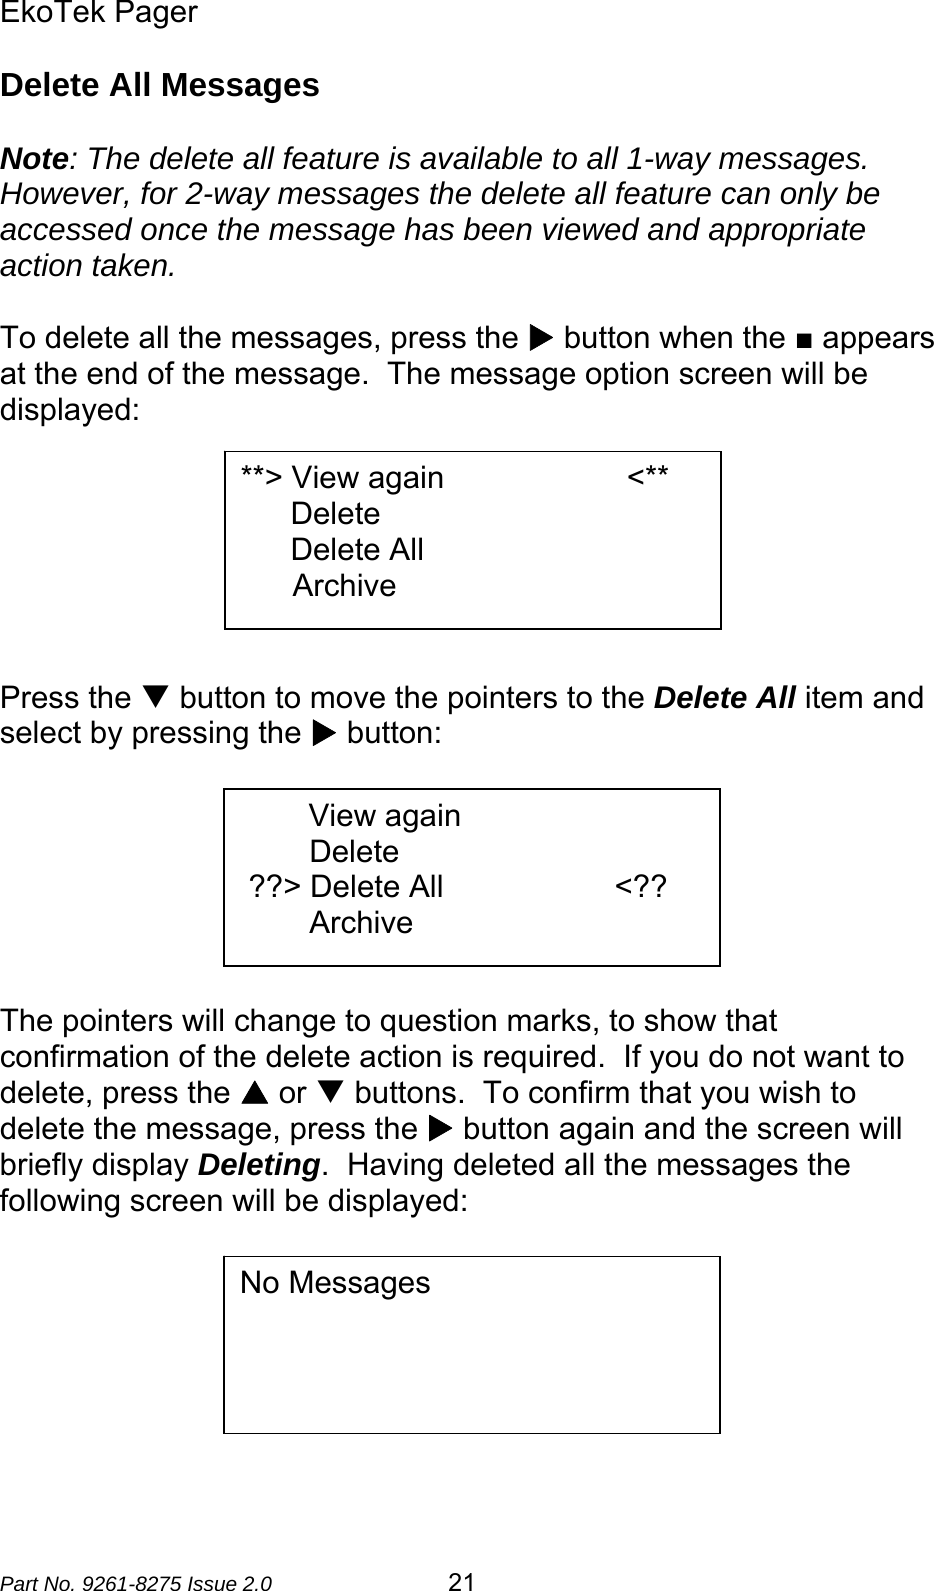 EkoTek Pager  Part No. 9261-8275 Issue 2.0  21 Delete All Messages  Note: The delete all feature is available to all 1-way messages.  However, for 2-way messages the delete all feature can only be accessed once the message has been viewed and appropriate action taken.  To delete all the messages, press the X button when the ■ appears at the end of the message.  The message option screen will be displayed:        Press the T button to move the pointers to the Delete All item and select by pressing the X button:        The pointers will change to question marks, to show that confirmation of the delete action is required.  If you do not want to delete, press the S or T buttons.  To confirm that you wish to delete the message, press the X button again and the screen will briefly display Deleting.  Having deleted all the messages the following screen will be displayed:         **&gt; View again                     &lt;** Delete Delete All       Archive No Messages                      View again         Delete  ??&gt; Delete All      &lt;??         Archive 